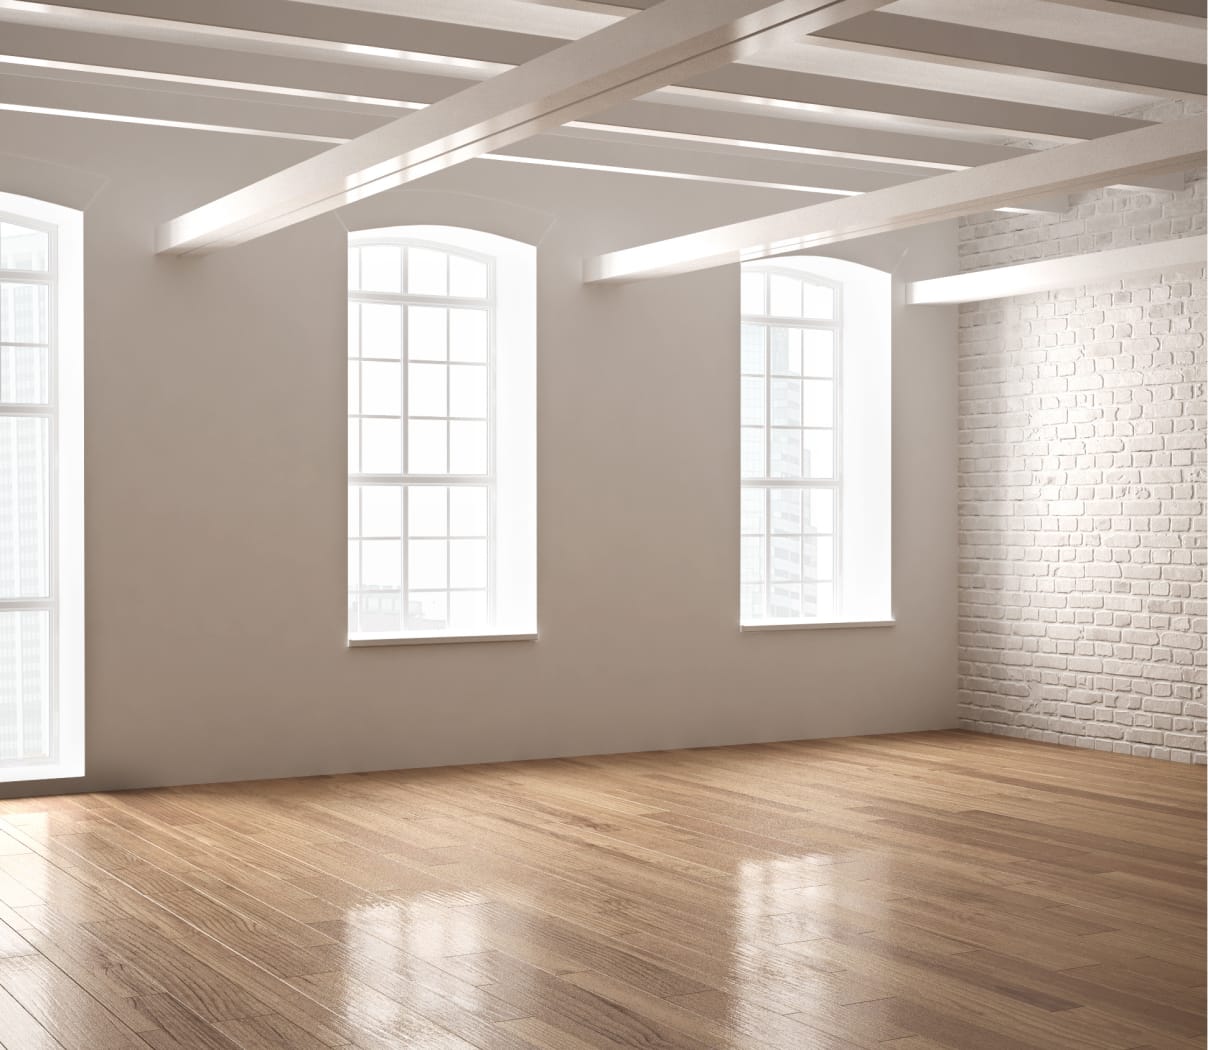 Clean, empty apartment with wood floors, white brick walls, and natural light coming in through the windows